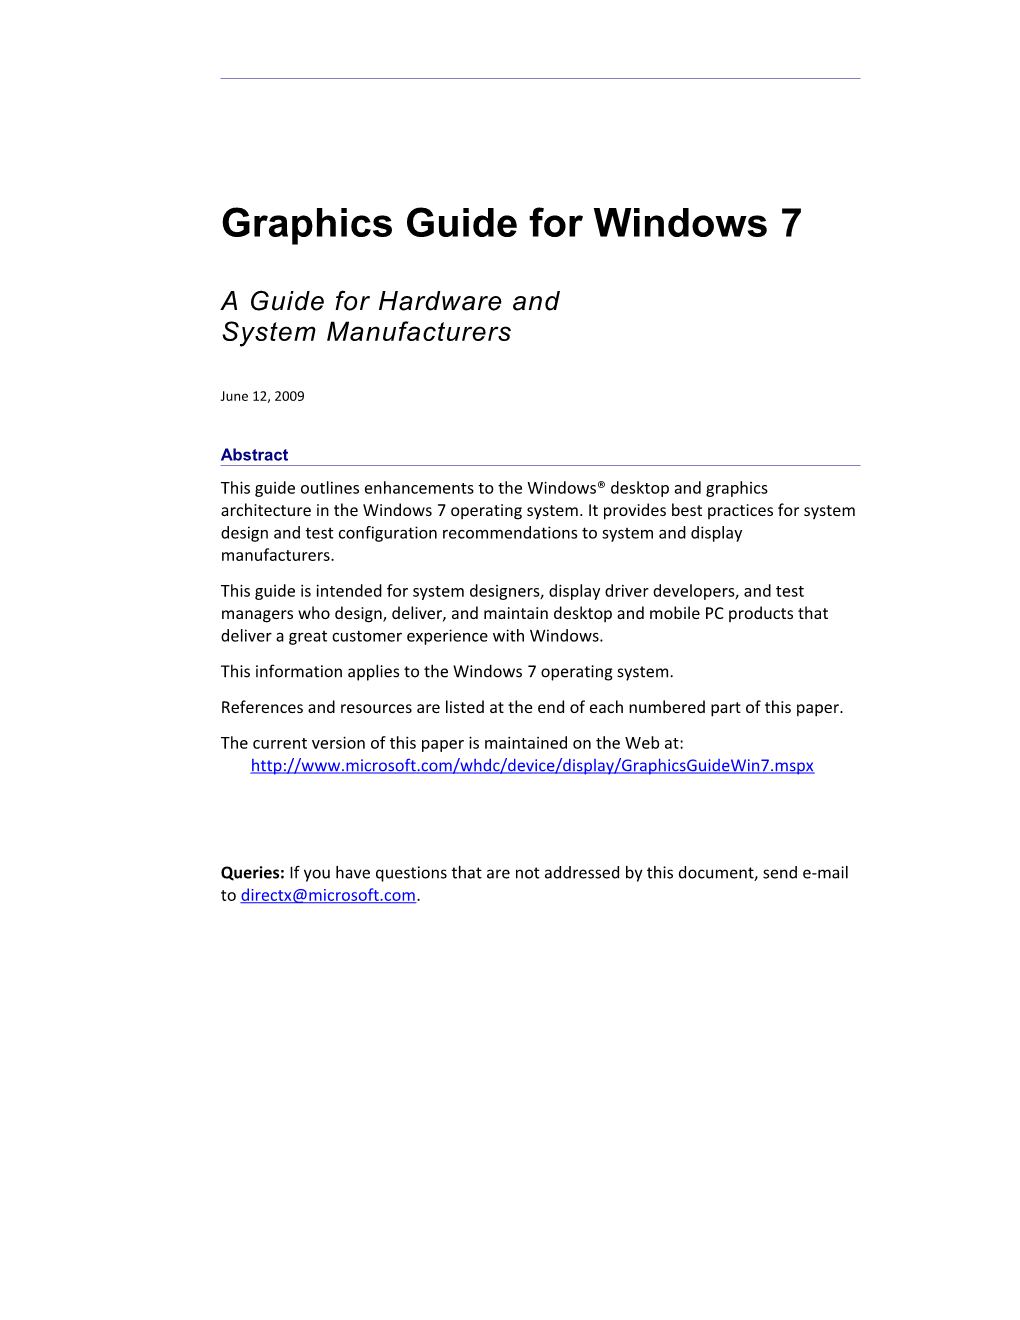 Graphics Guide for Windows 7 1